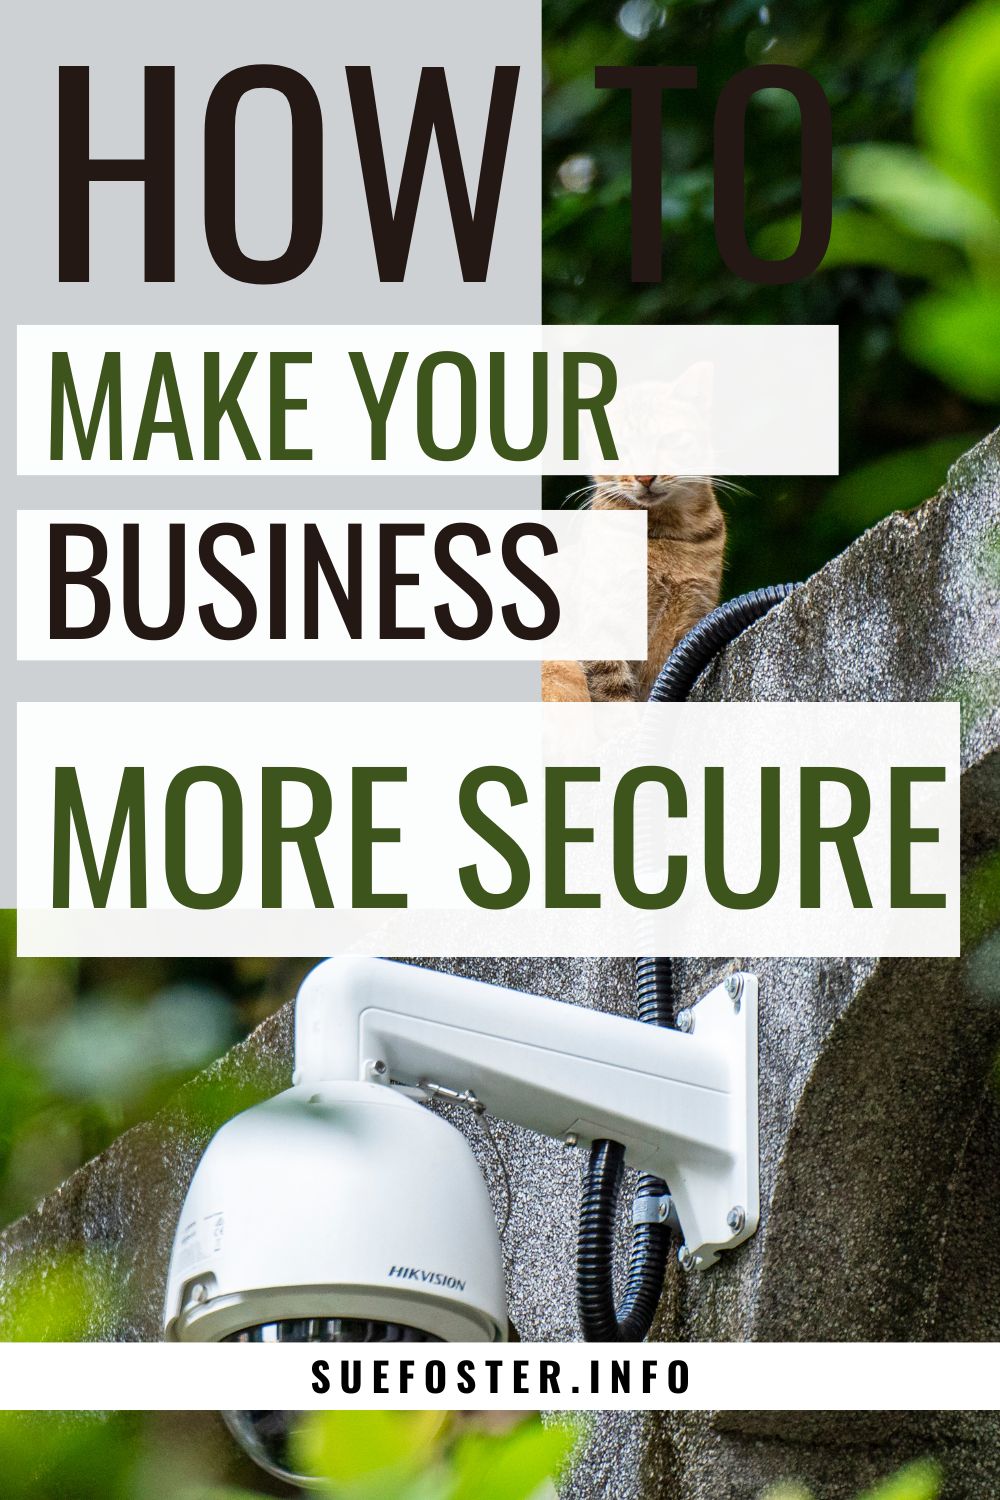 One thing that every business owner should take seriously is security. Here's how to make your workplace more secure.